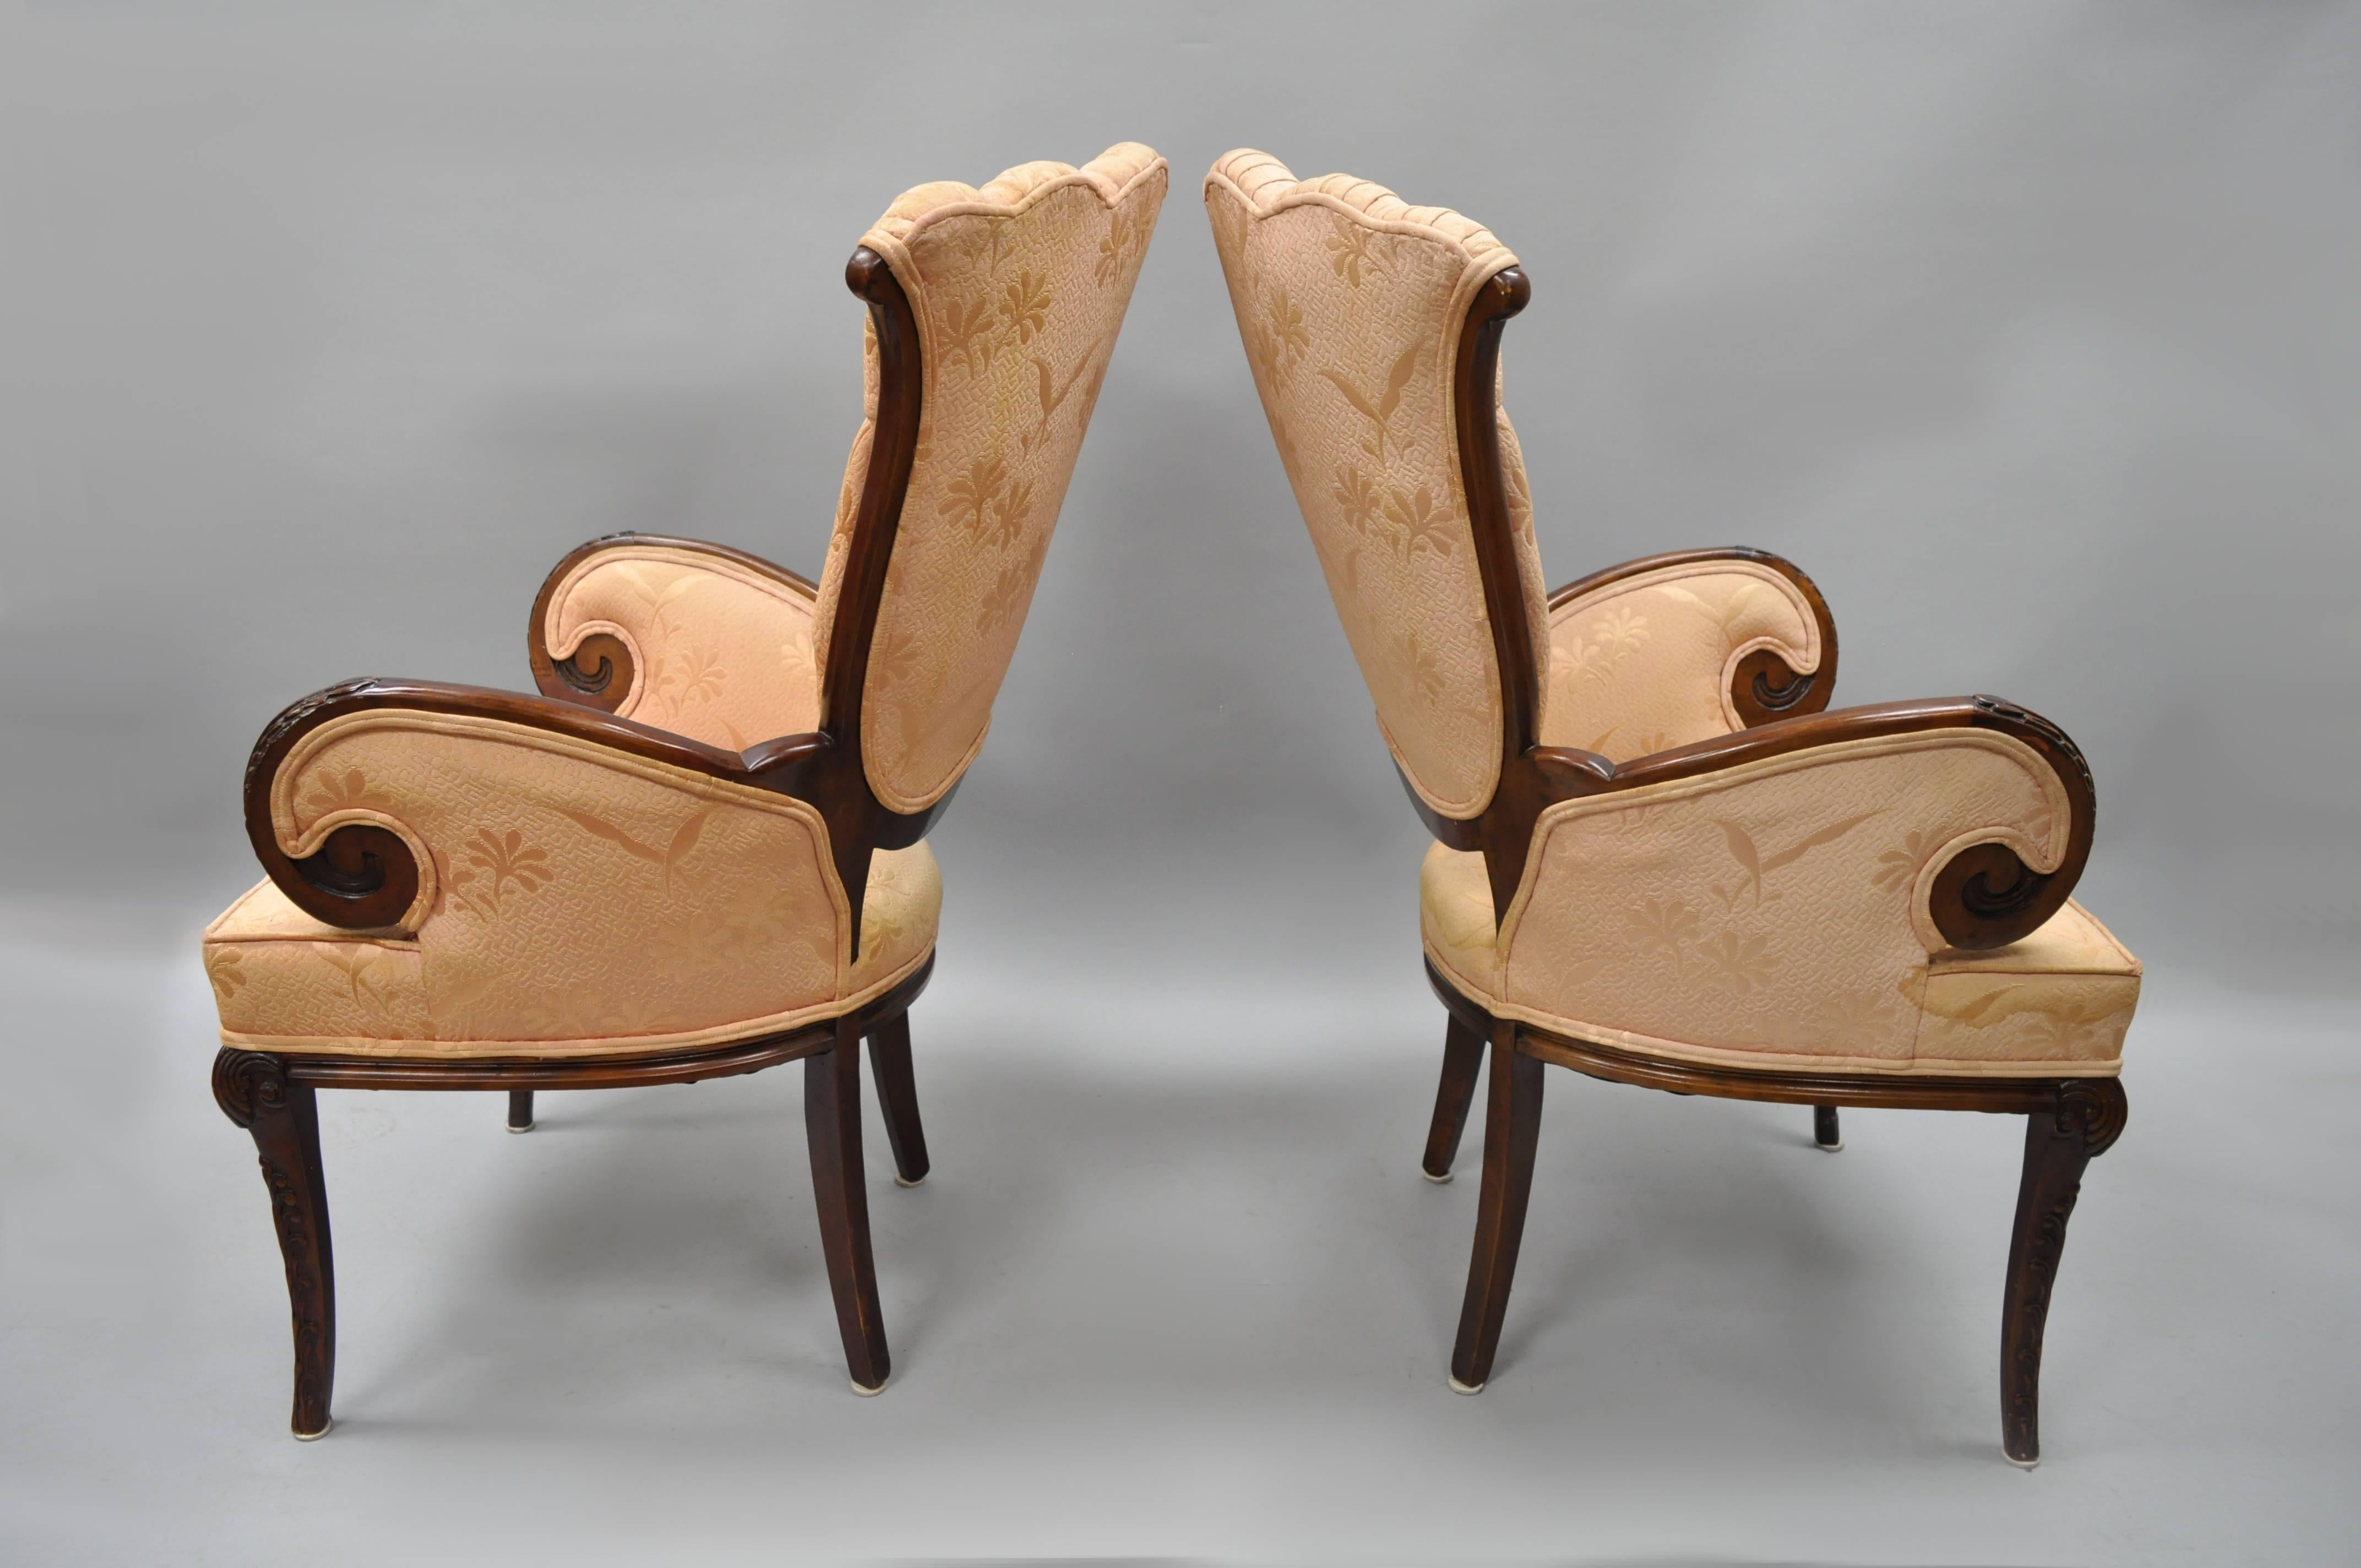 Carved Pair of Mahogany Hollywood Regency Tufted Armchairs Attributed to Grosfeld House For Sale